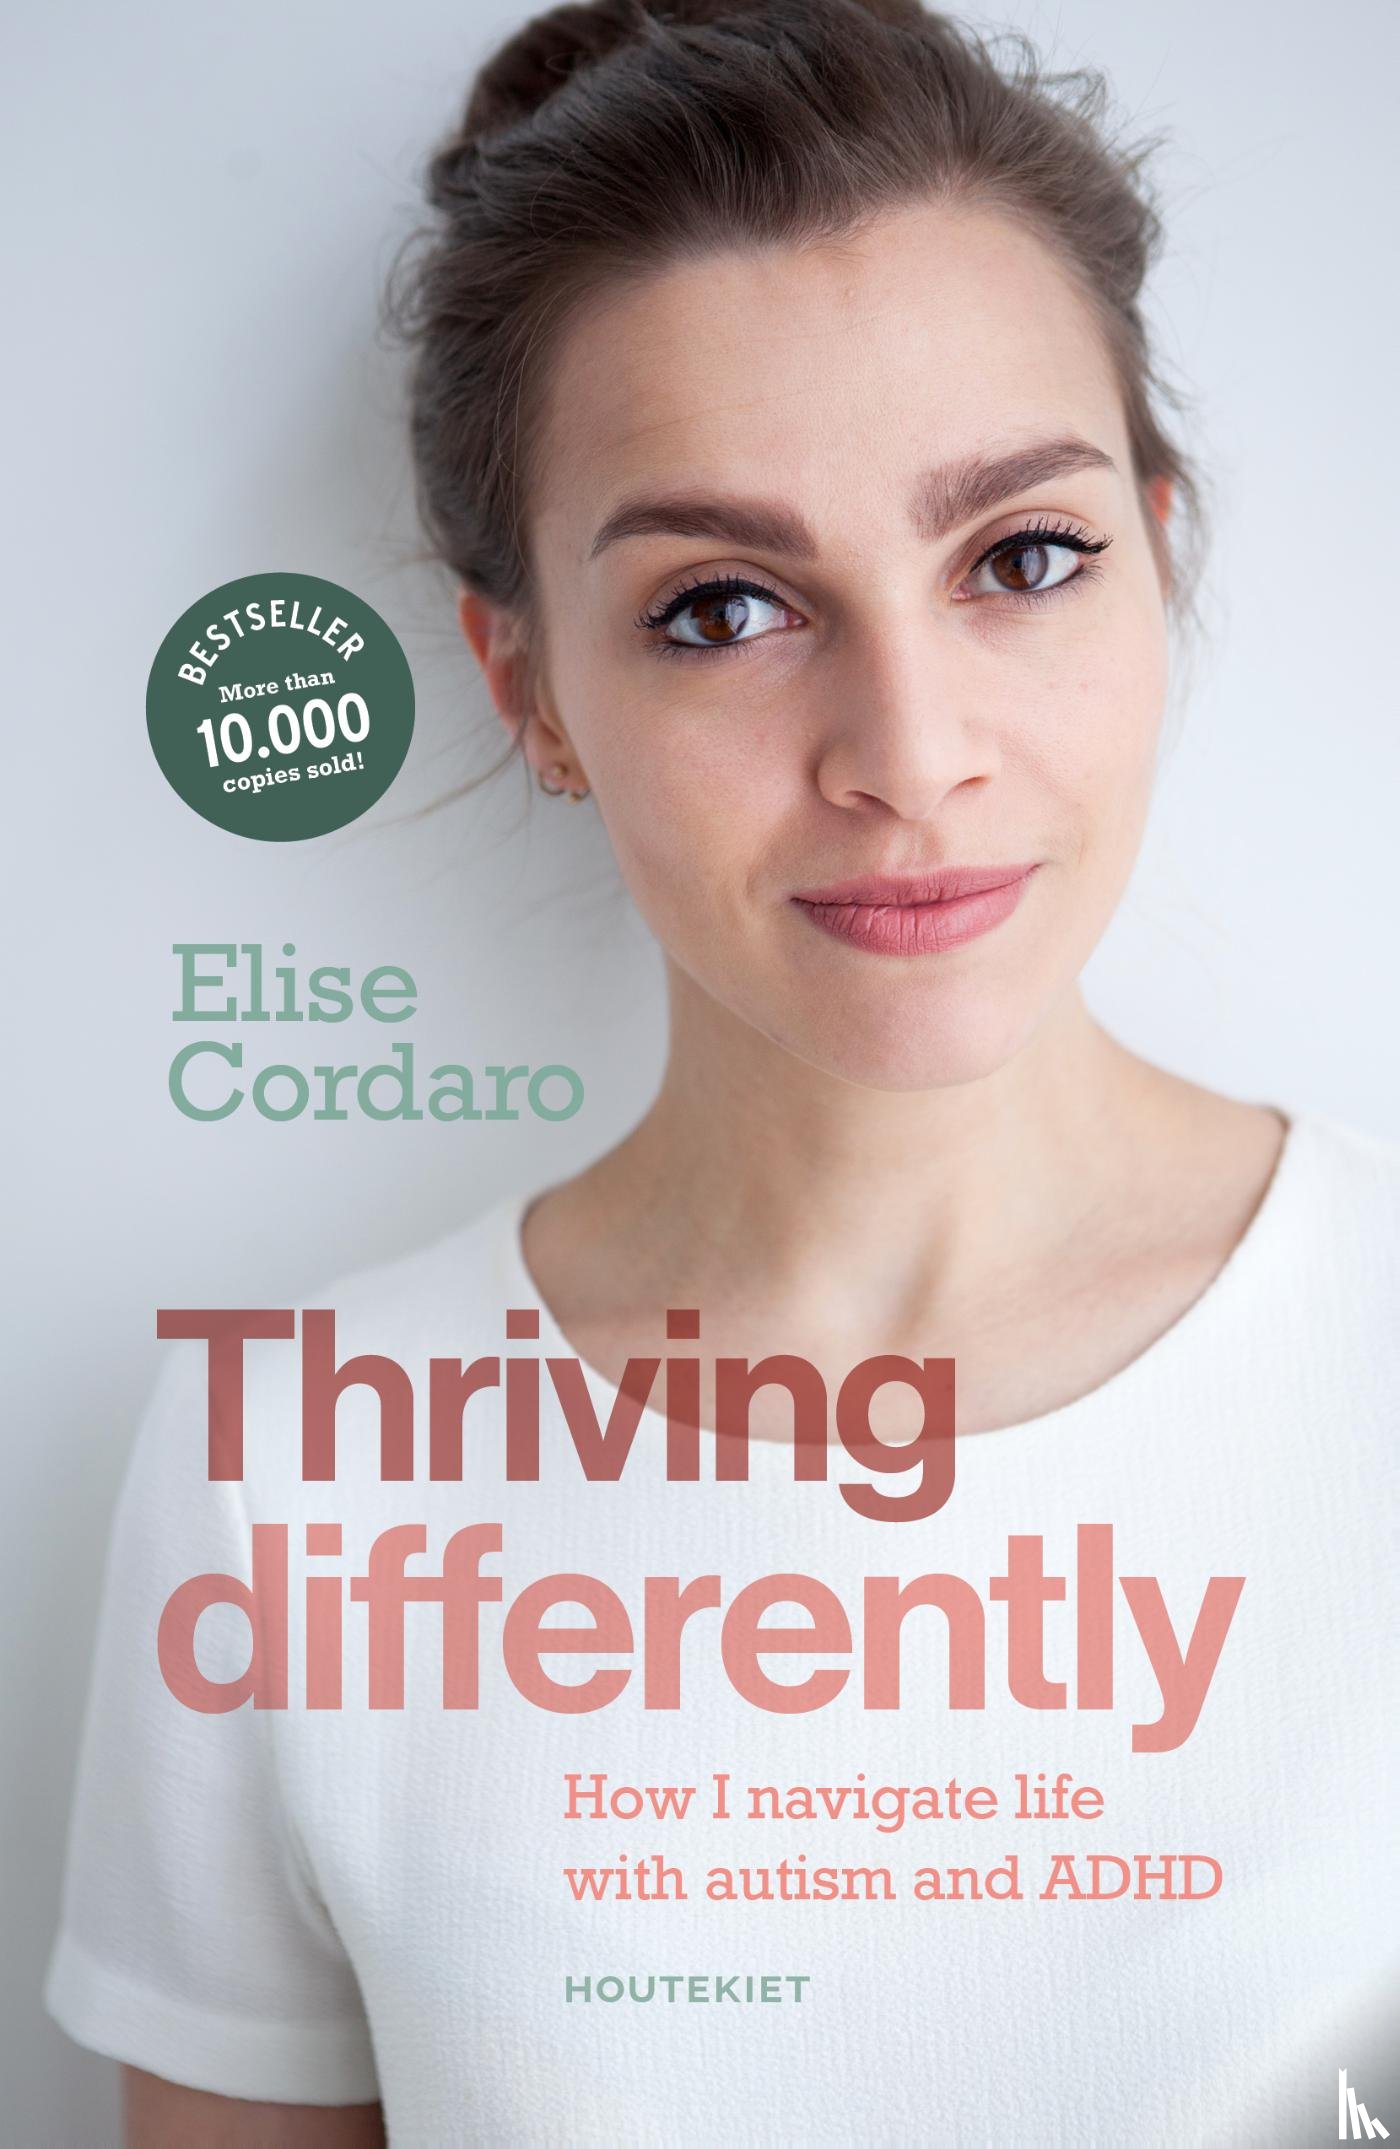 Cordaro, Elise - Thriving differently